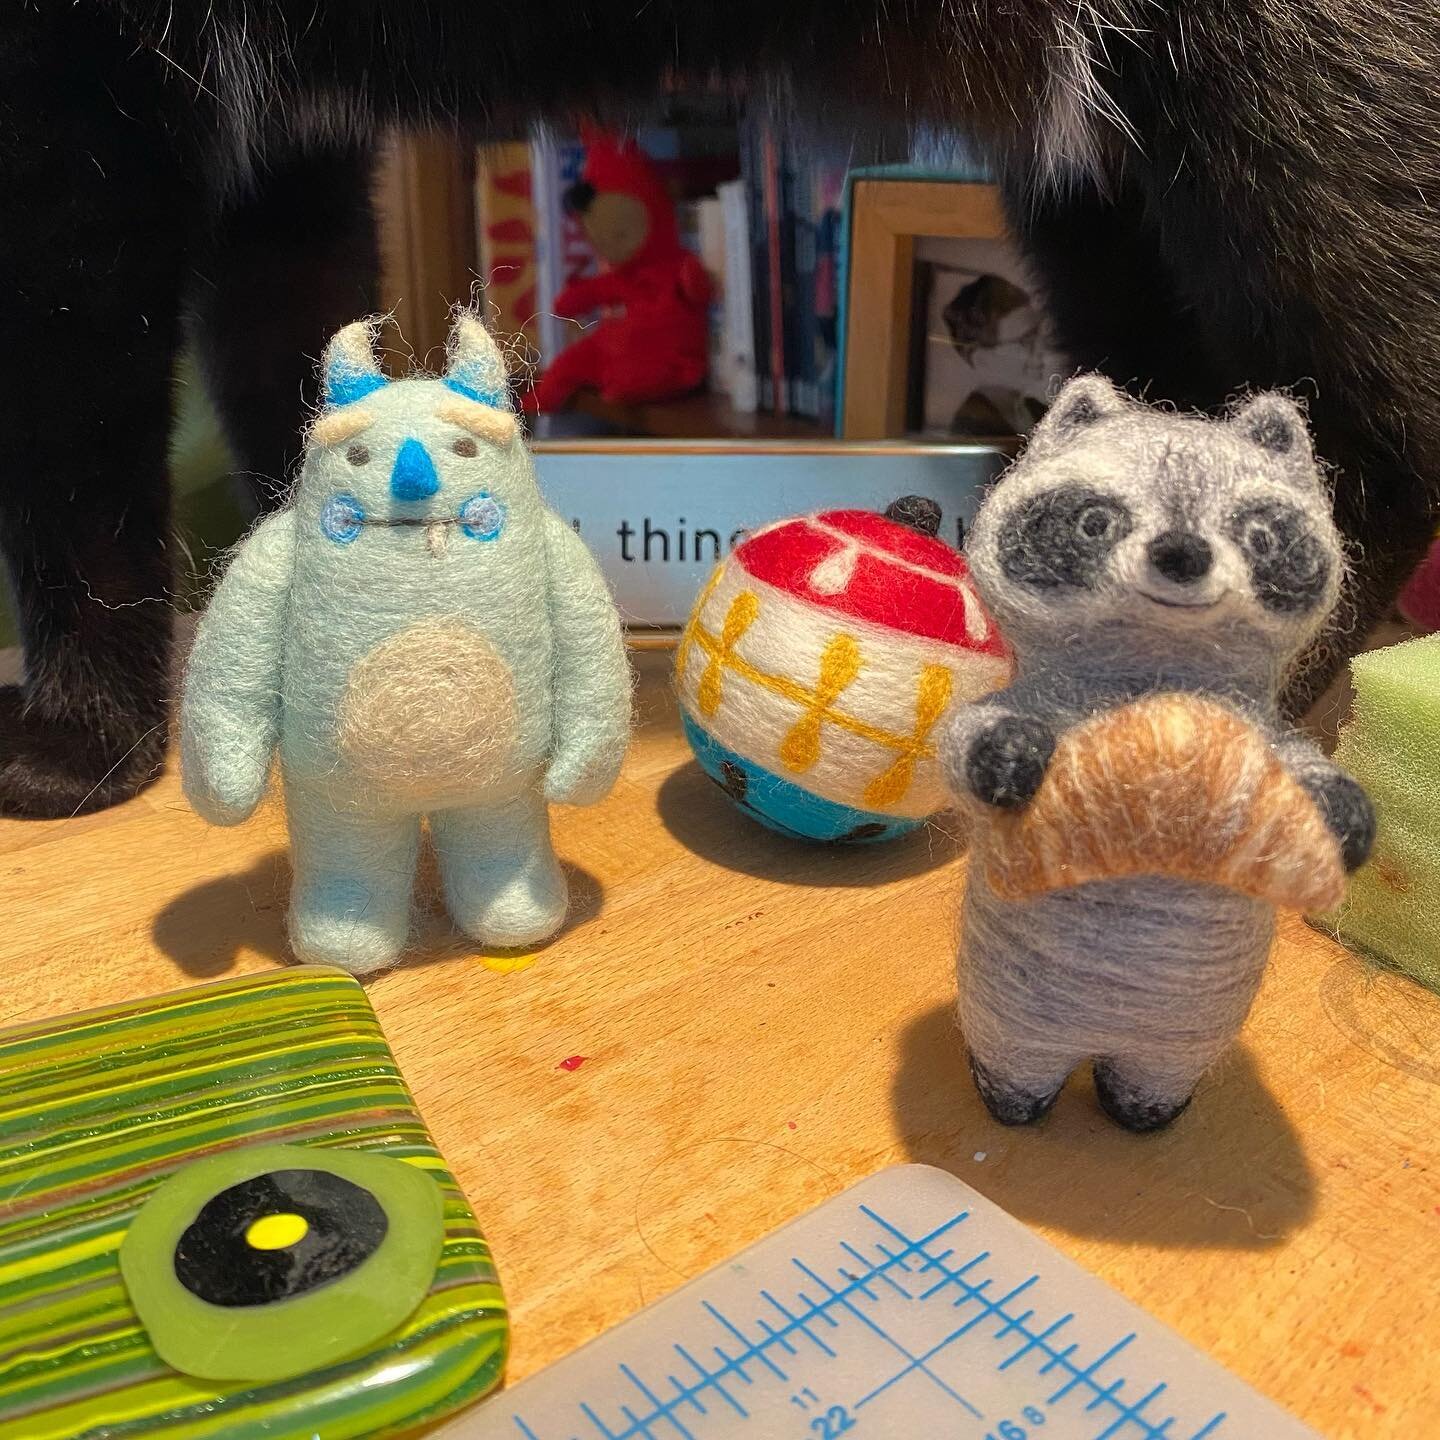 Hello again! 🥴
Just popping in to post a few cuties that I hope to get onto Etsy this week. (Post for accountability, perhaps?)

Yes, that is a cat looming large over the critters, because I am a mom and I have cats, so I have no personal space at a